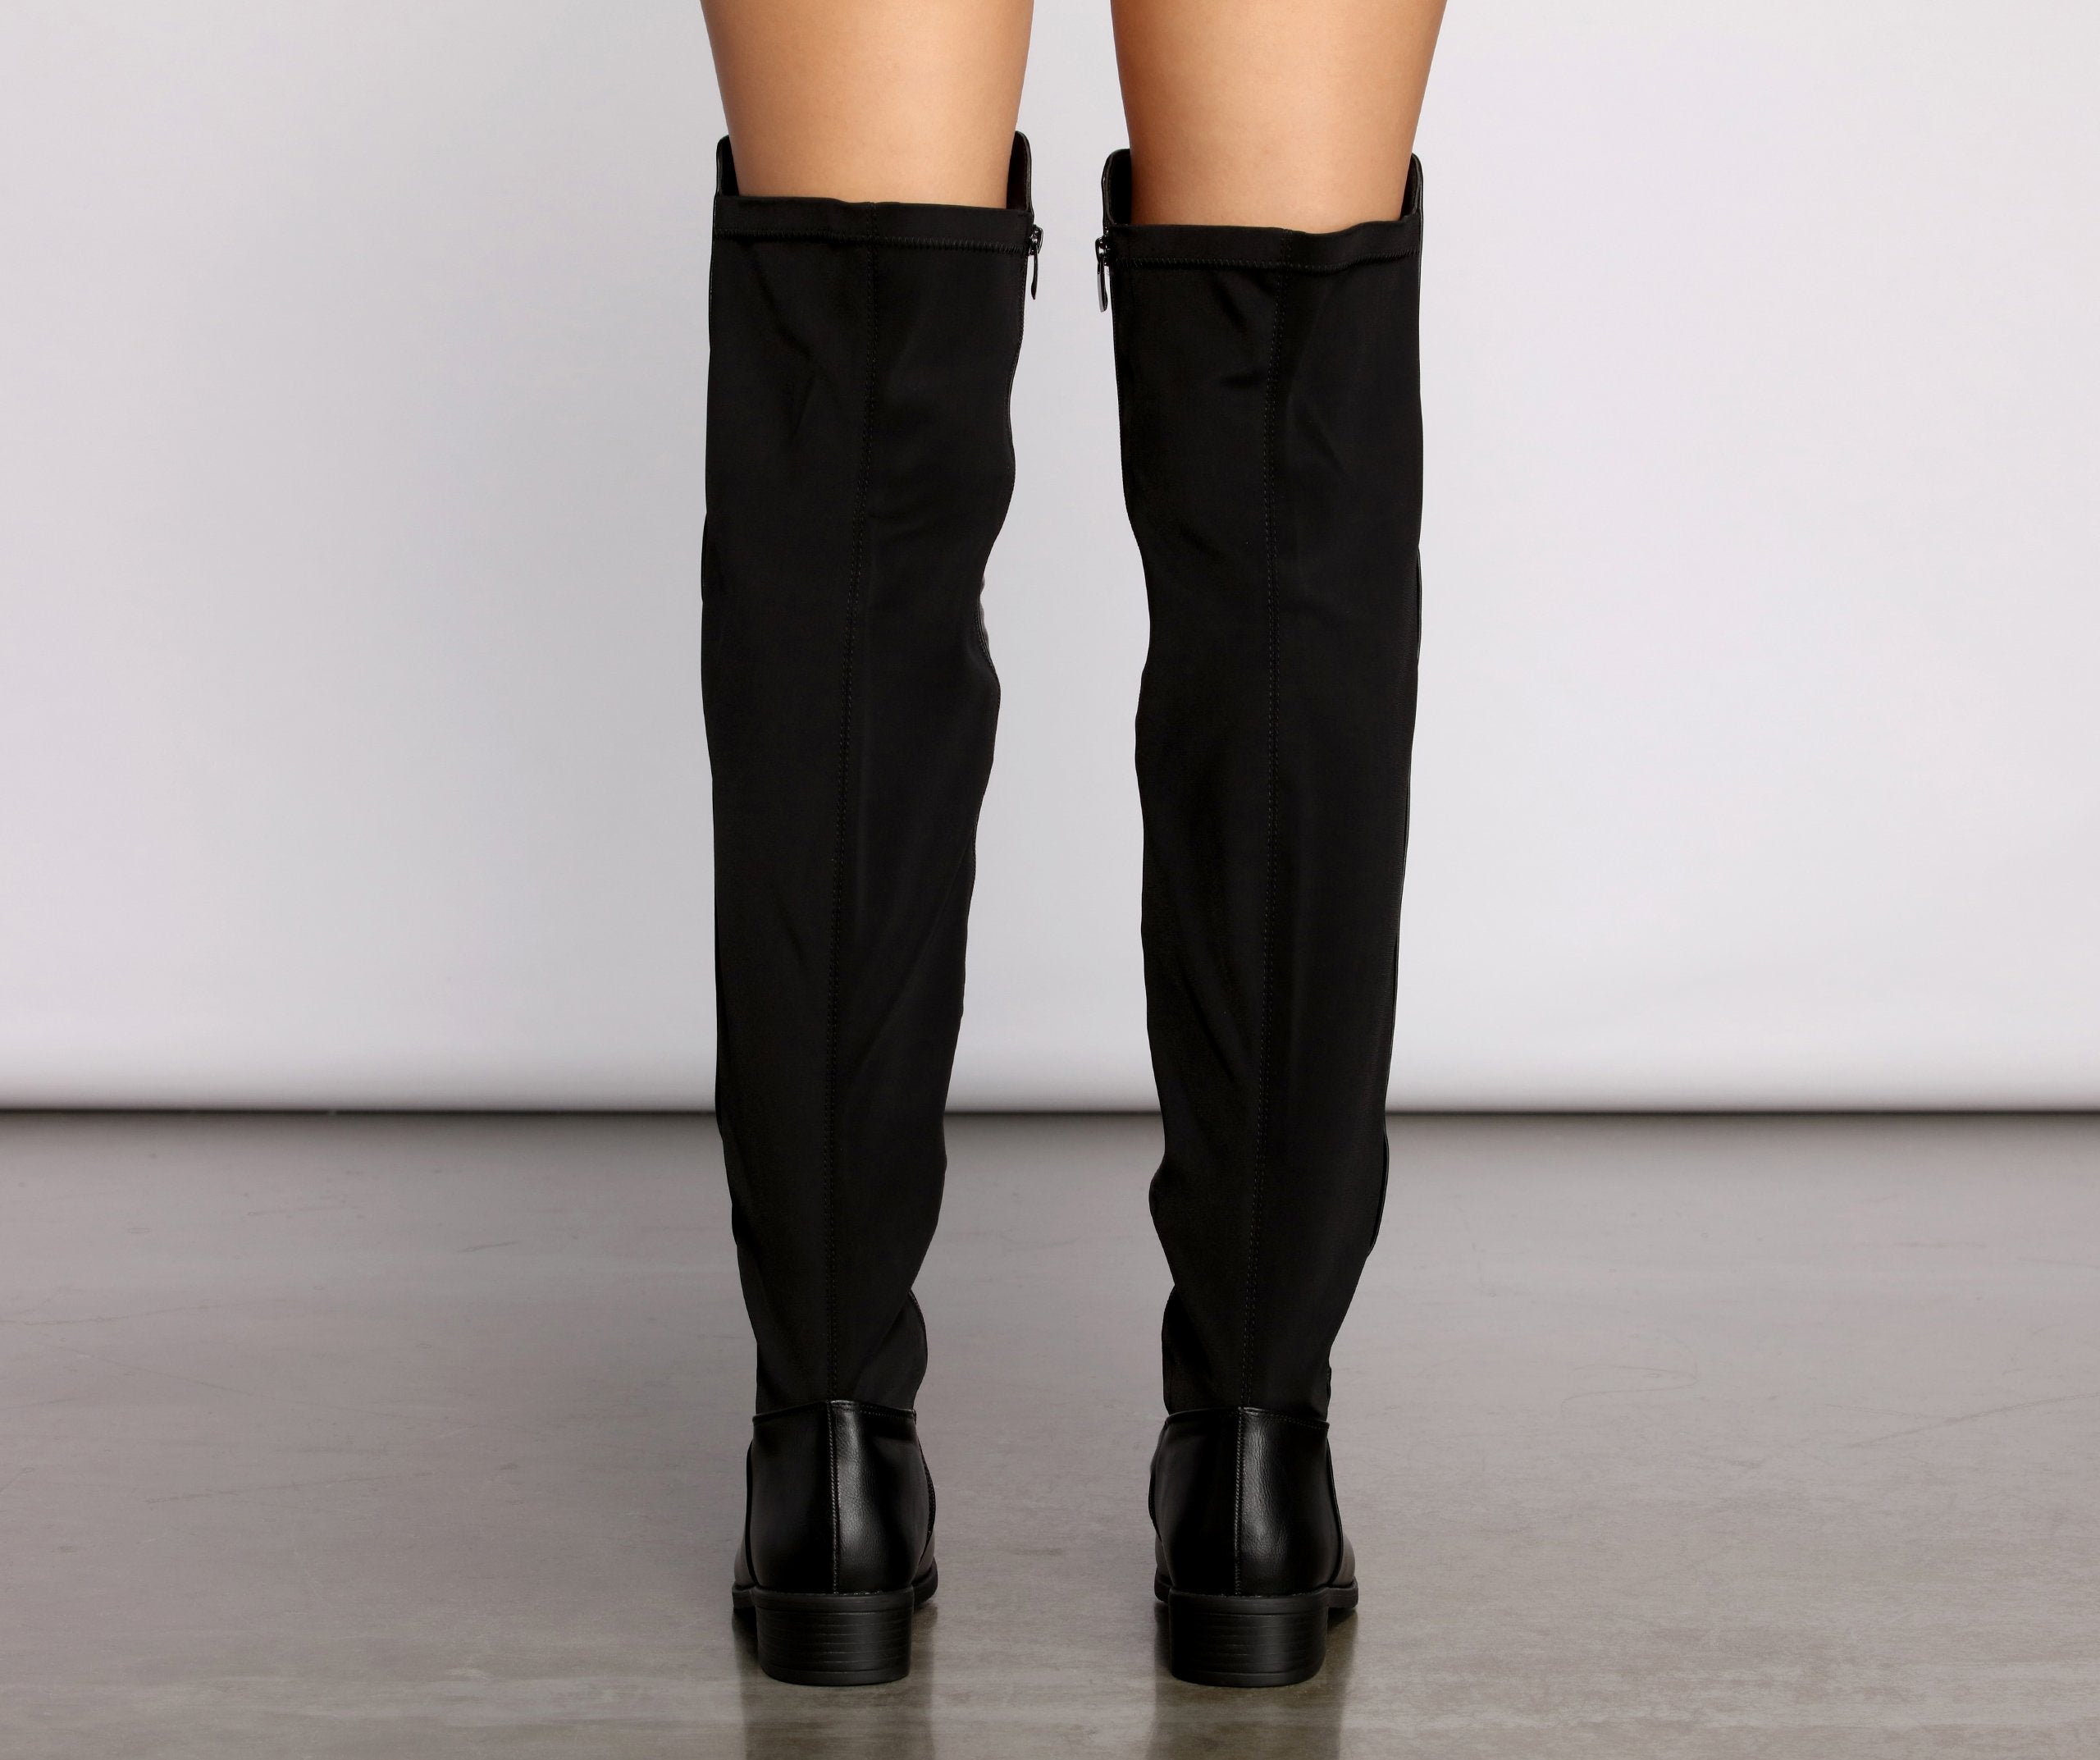 Chic And Sleek Over The Knee Boots - Lady Occasions